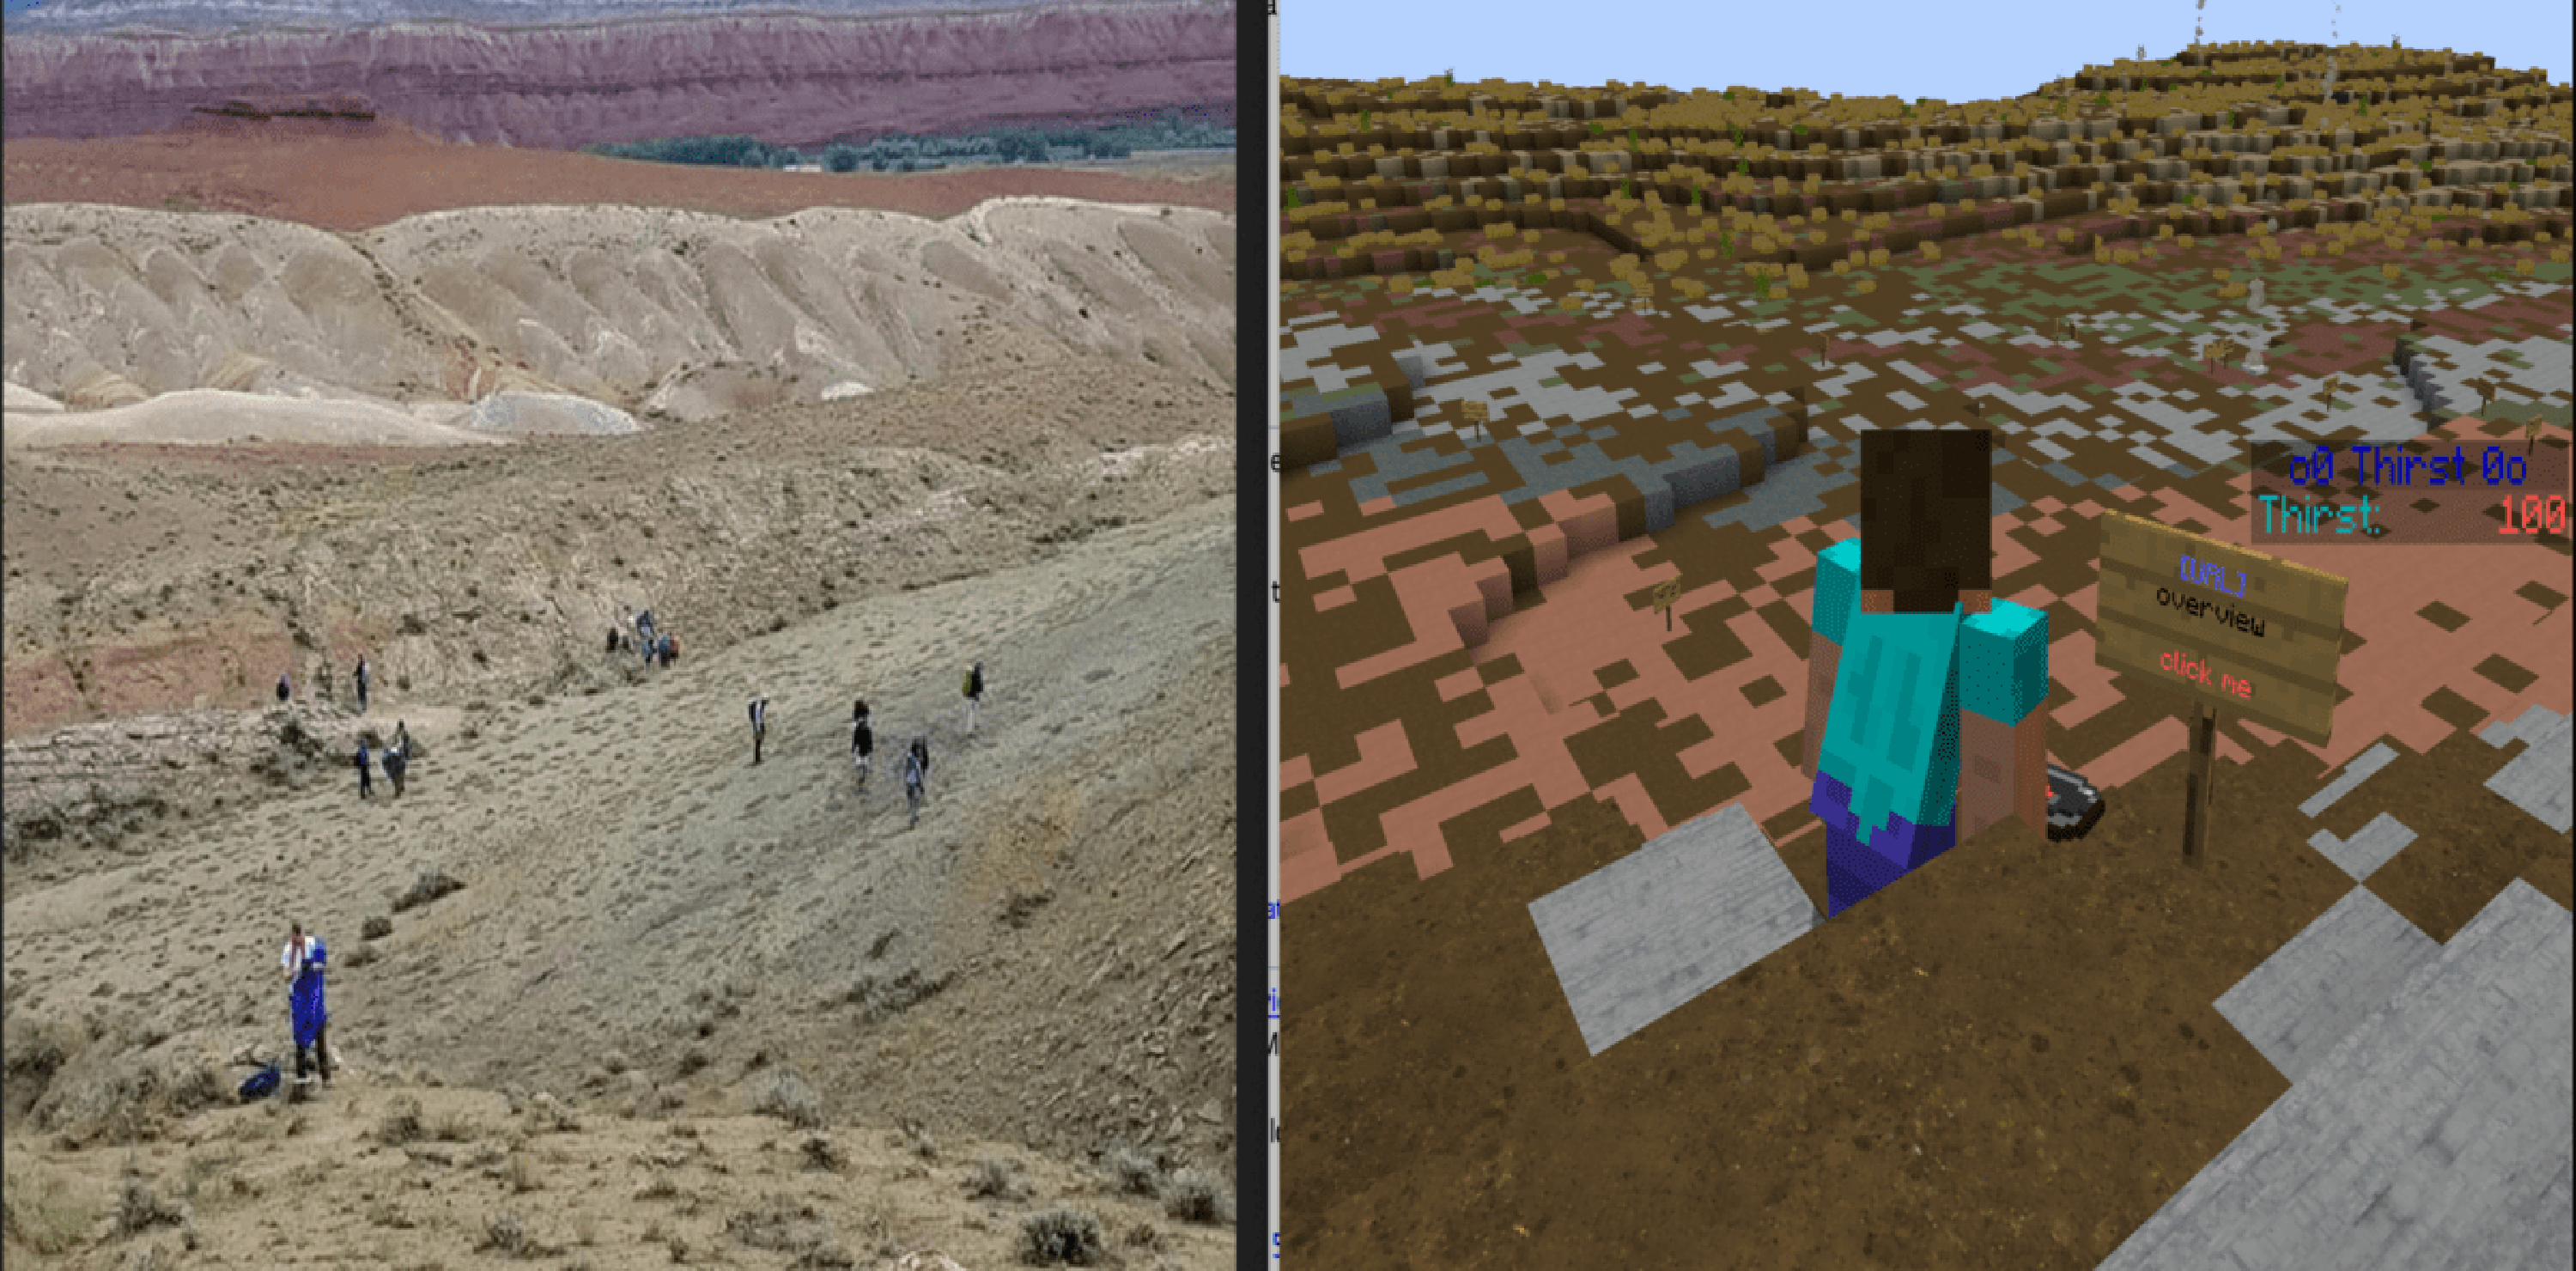 Dr. Will Parcell, who teaches Field Geology, turned to the computer game Minecraft to give students the field camp experience they would normally have in the Bighorn Basin of Wyoming and Montana during the summer. Parcell is one of many faculty members who are using the COVID-19 pandemic as a teachable moment for students.